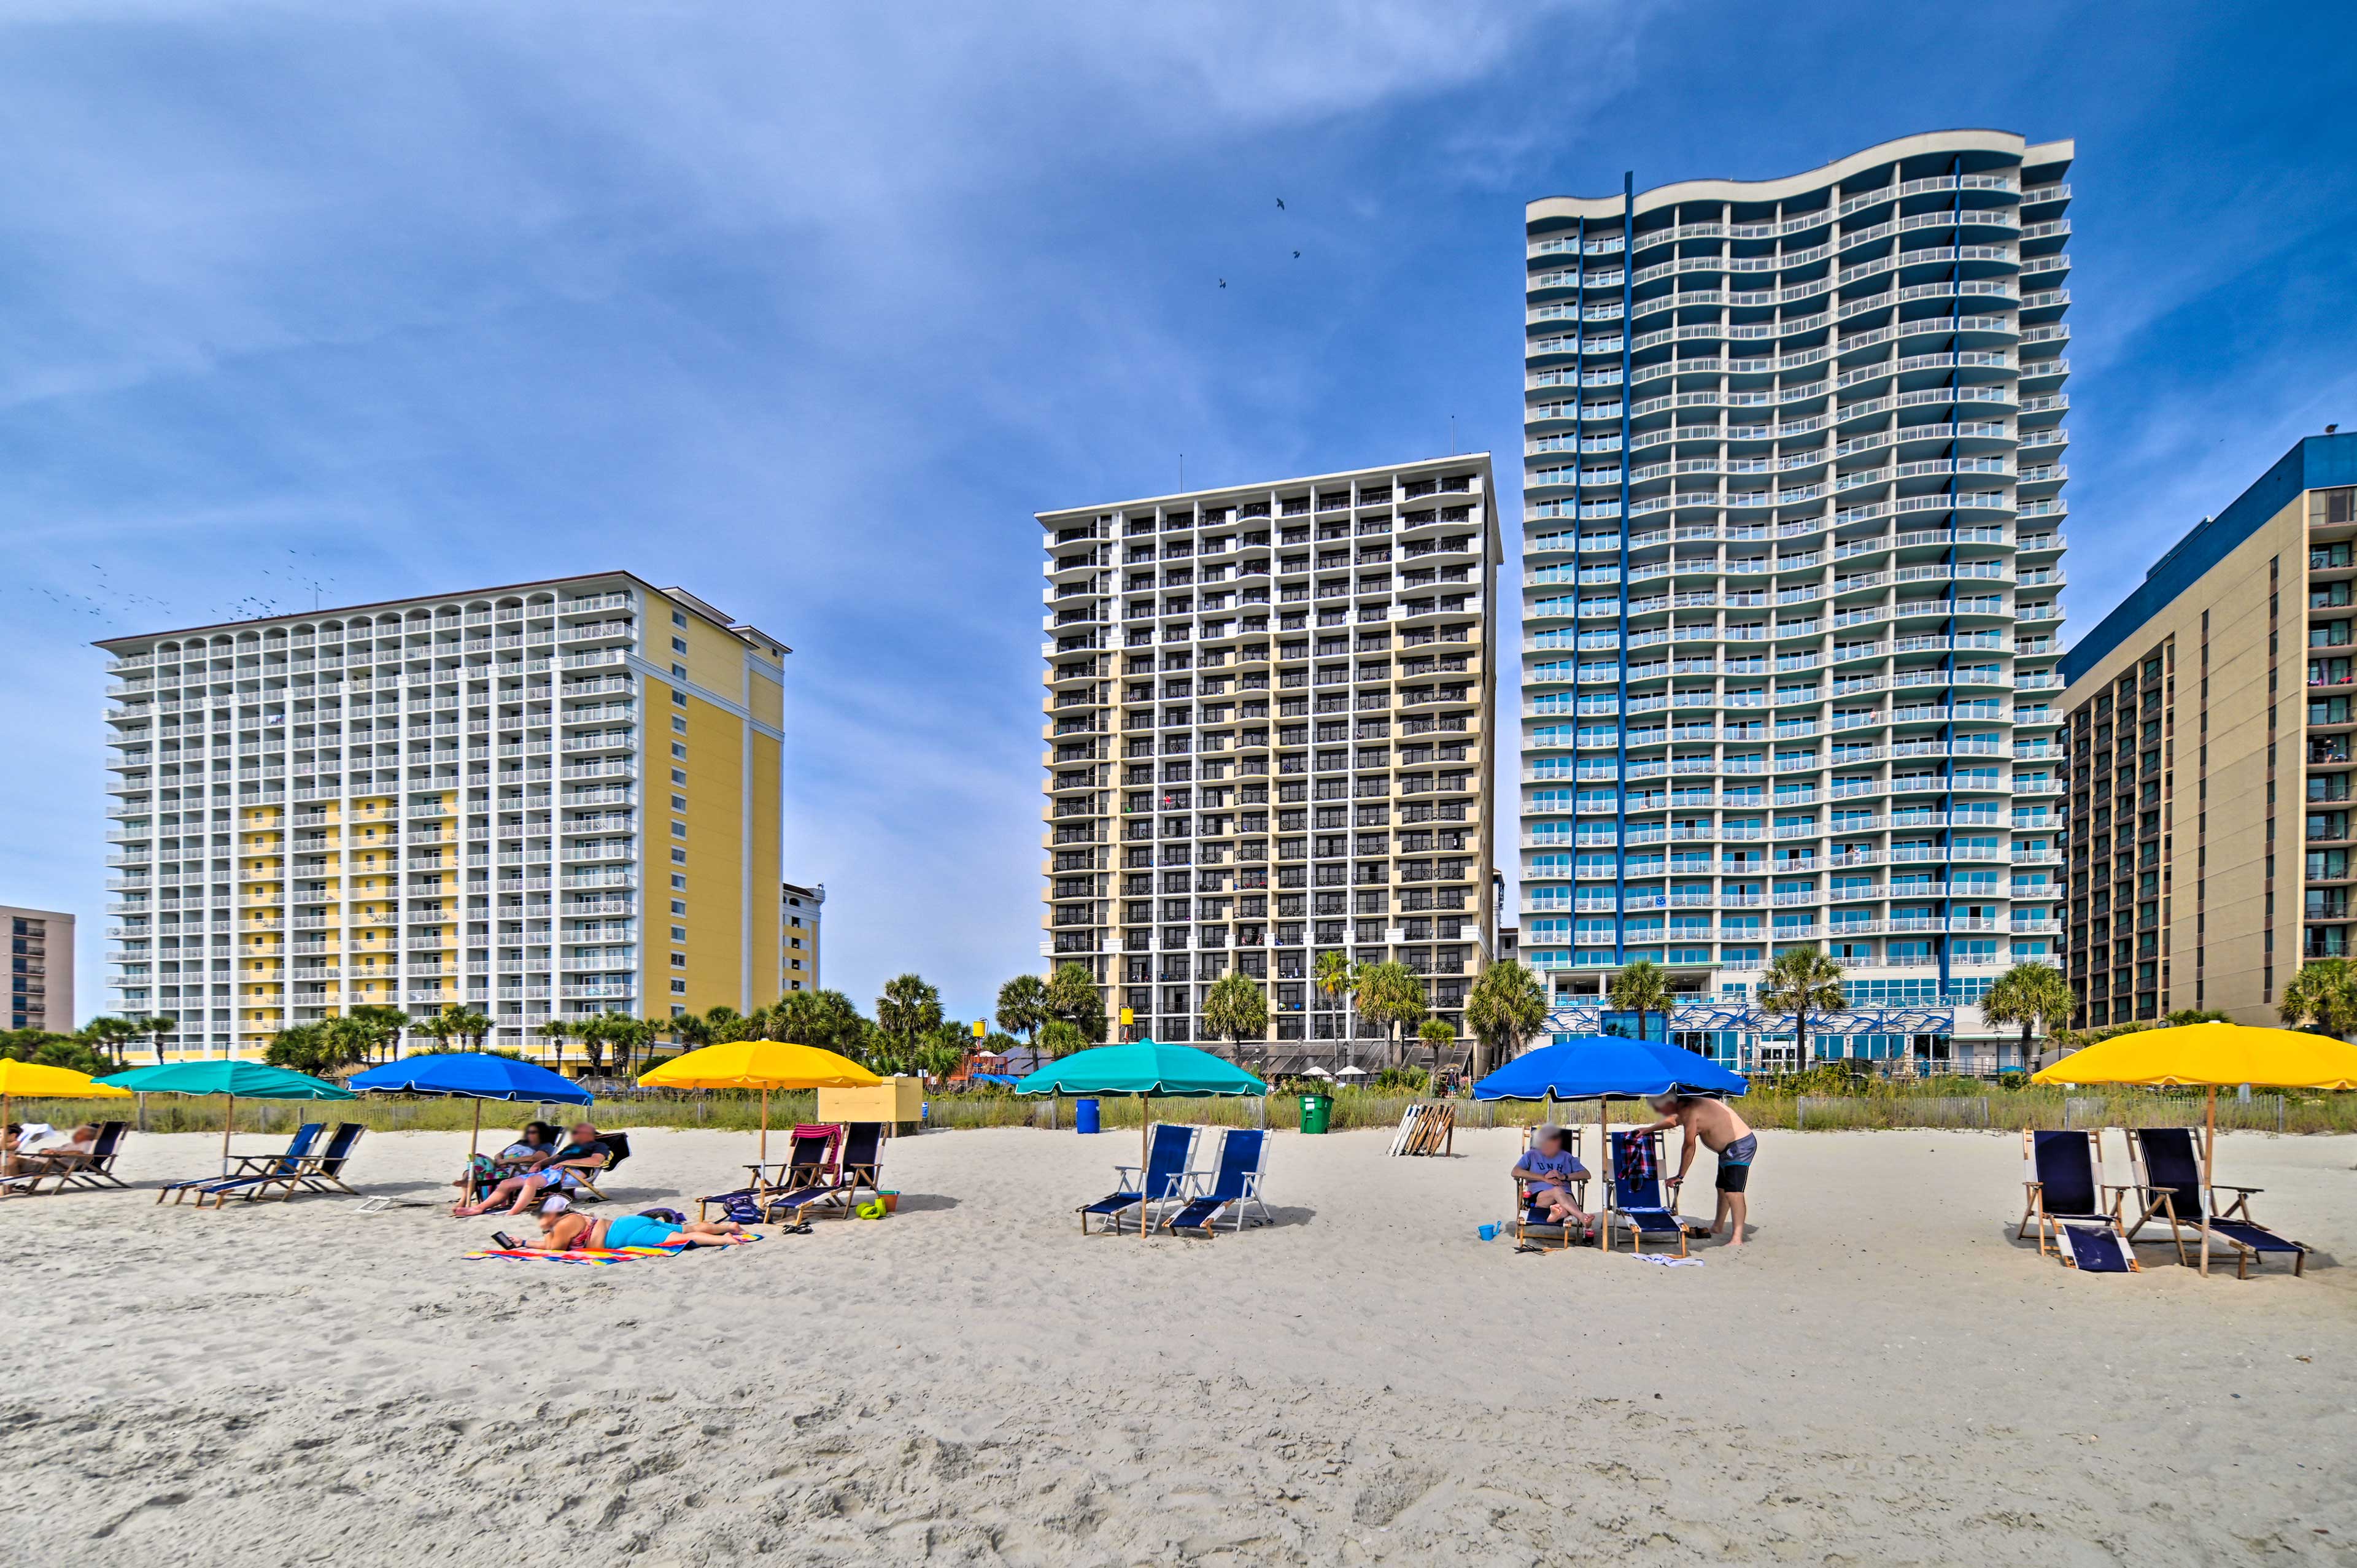 Myrtle Beach Vacation Rental | 1BR | 1BA | Step-Free Access | 550 Sq Ft